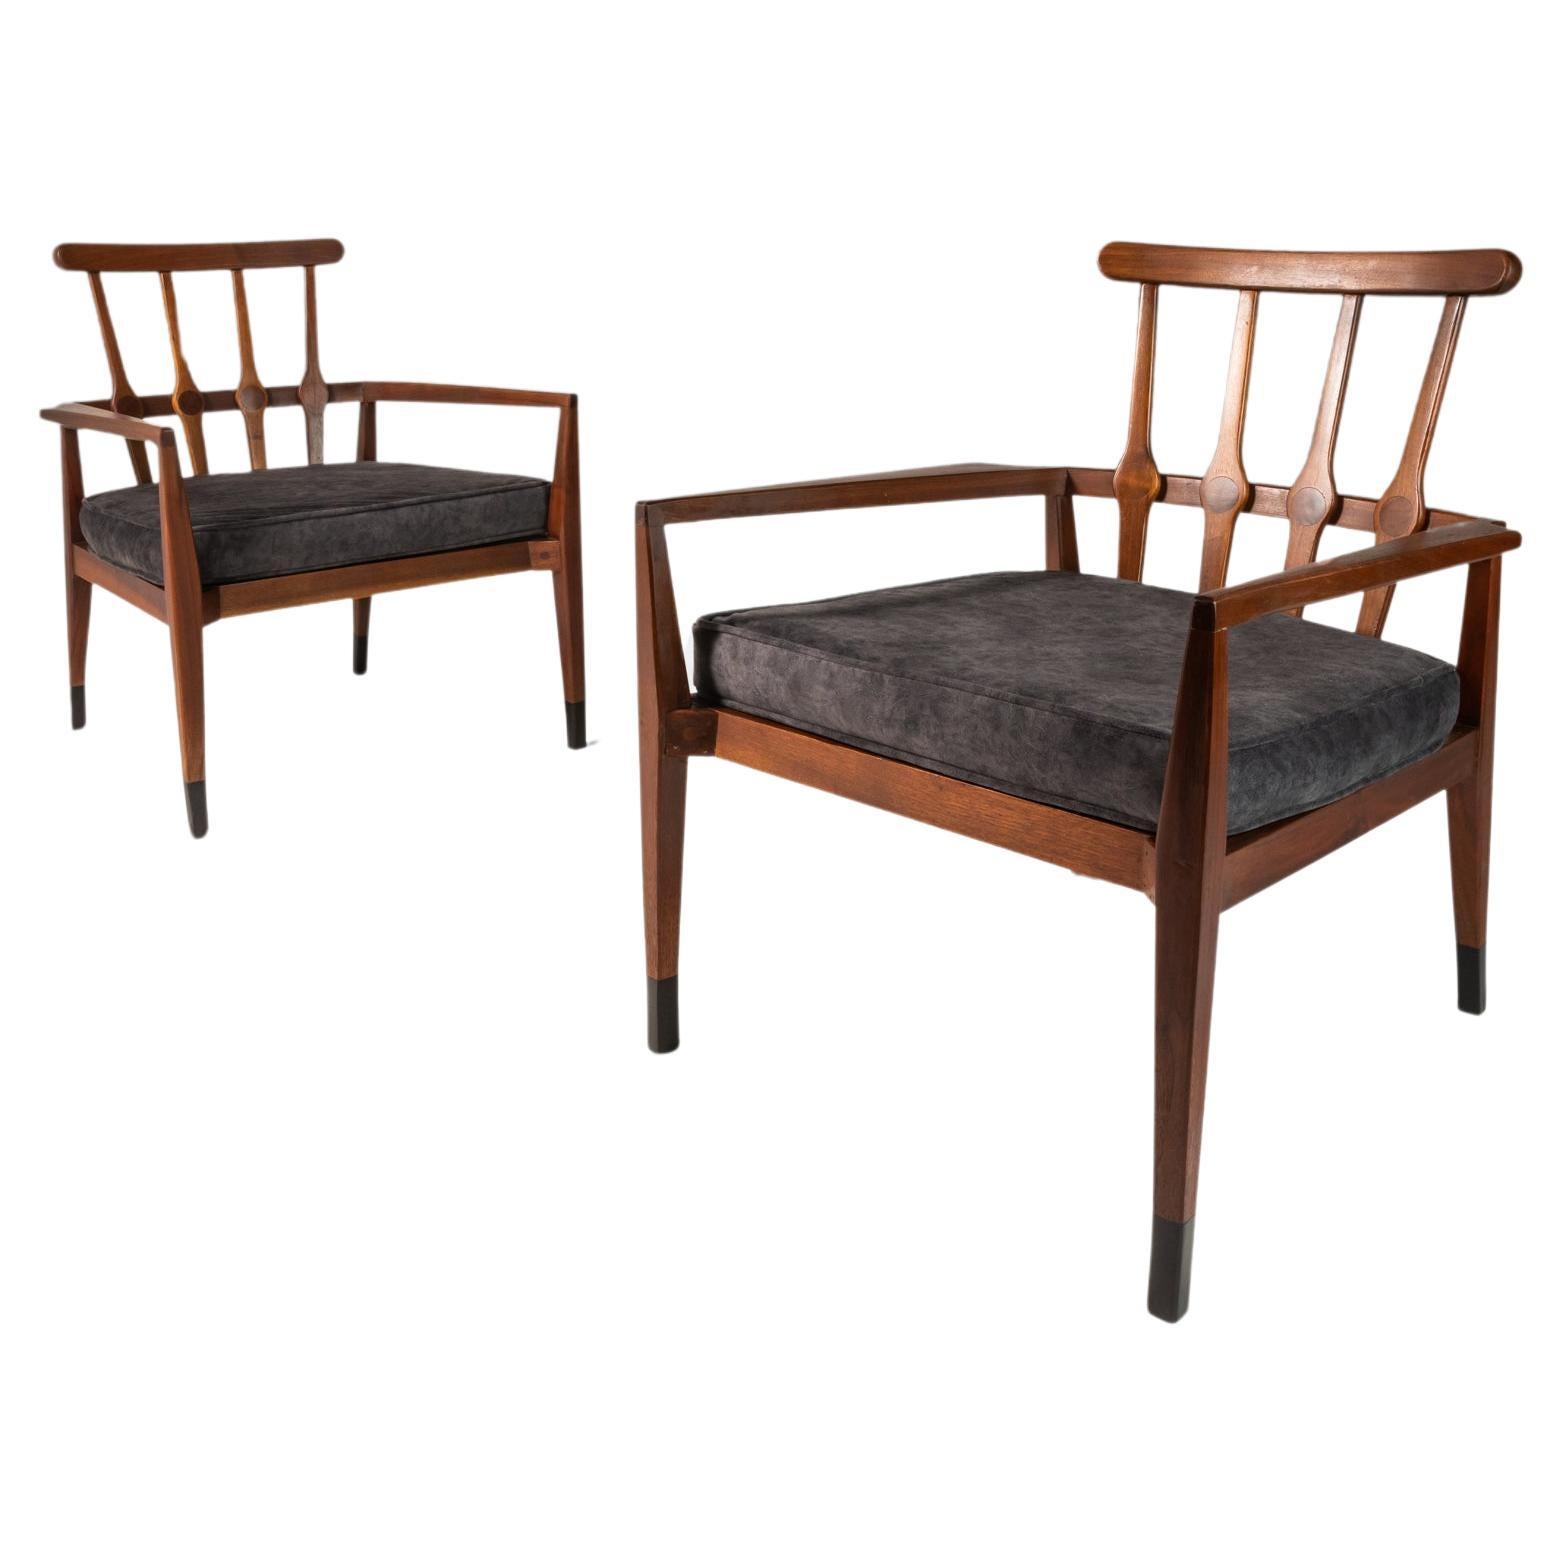 Set of Two (2) Angular Arm Chairs in Walnut & Velour by Foster McDavid, c. 1960s For Sale